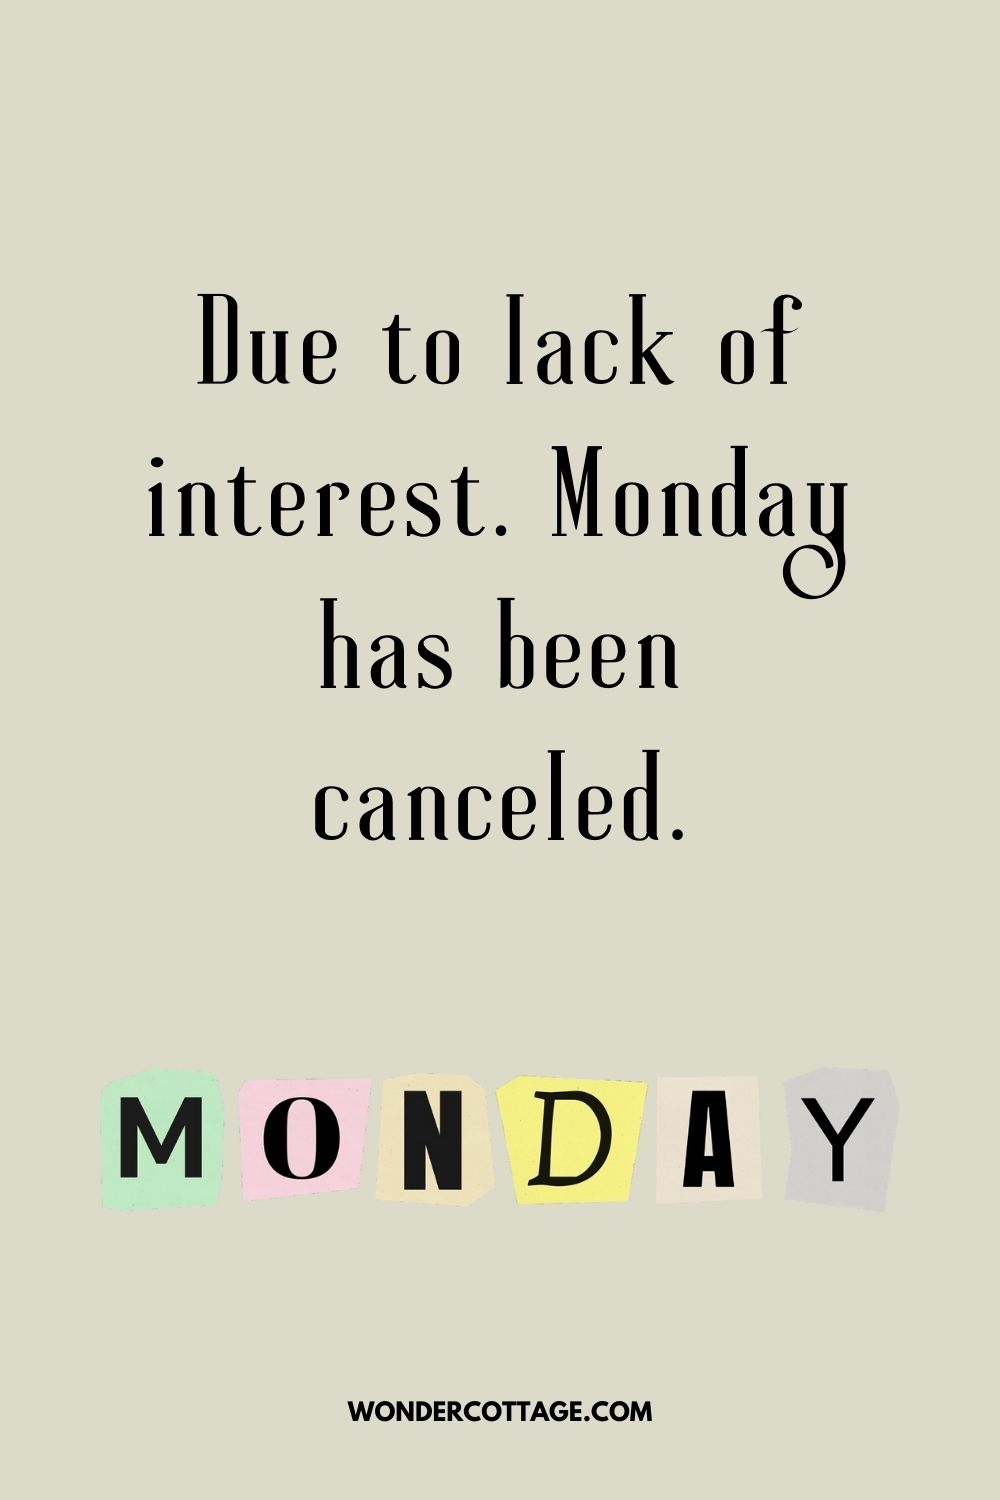 Due to lack of interest. Monday has been canceled.